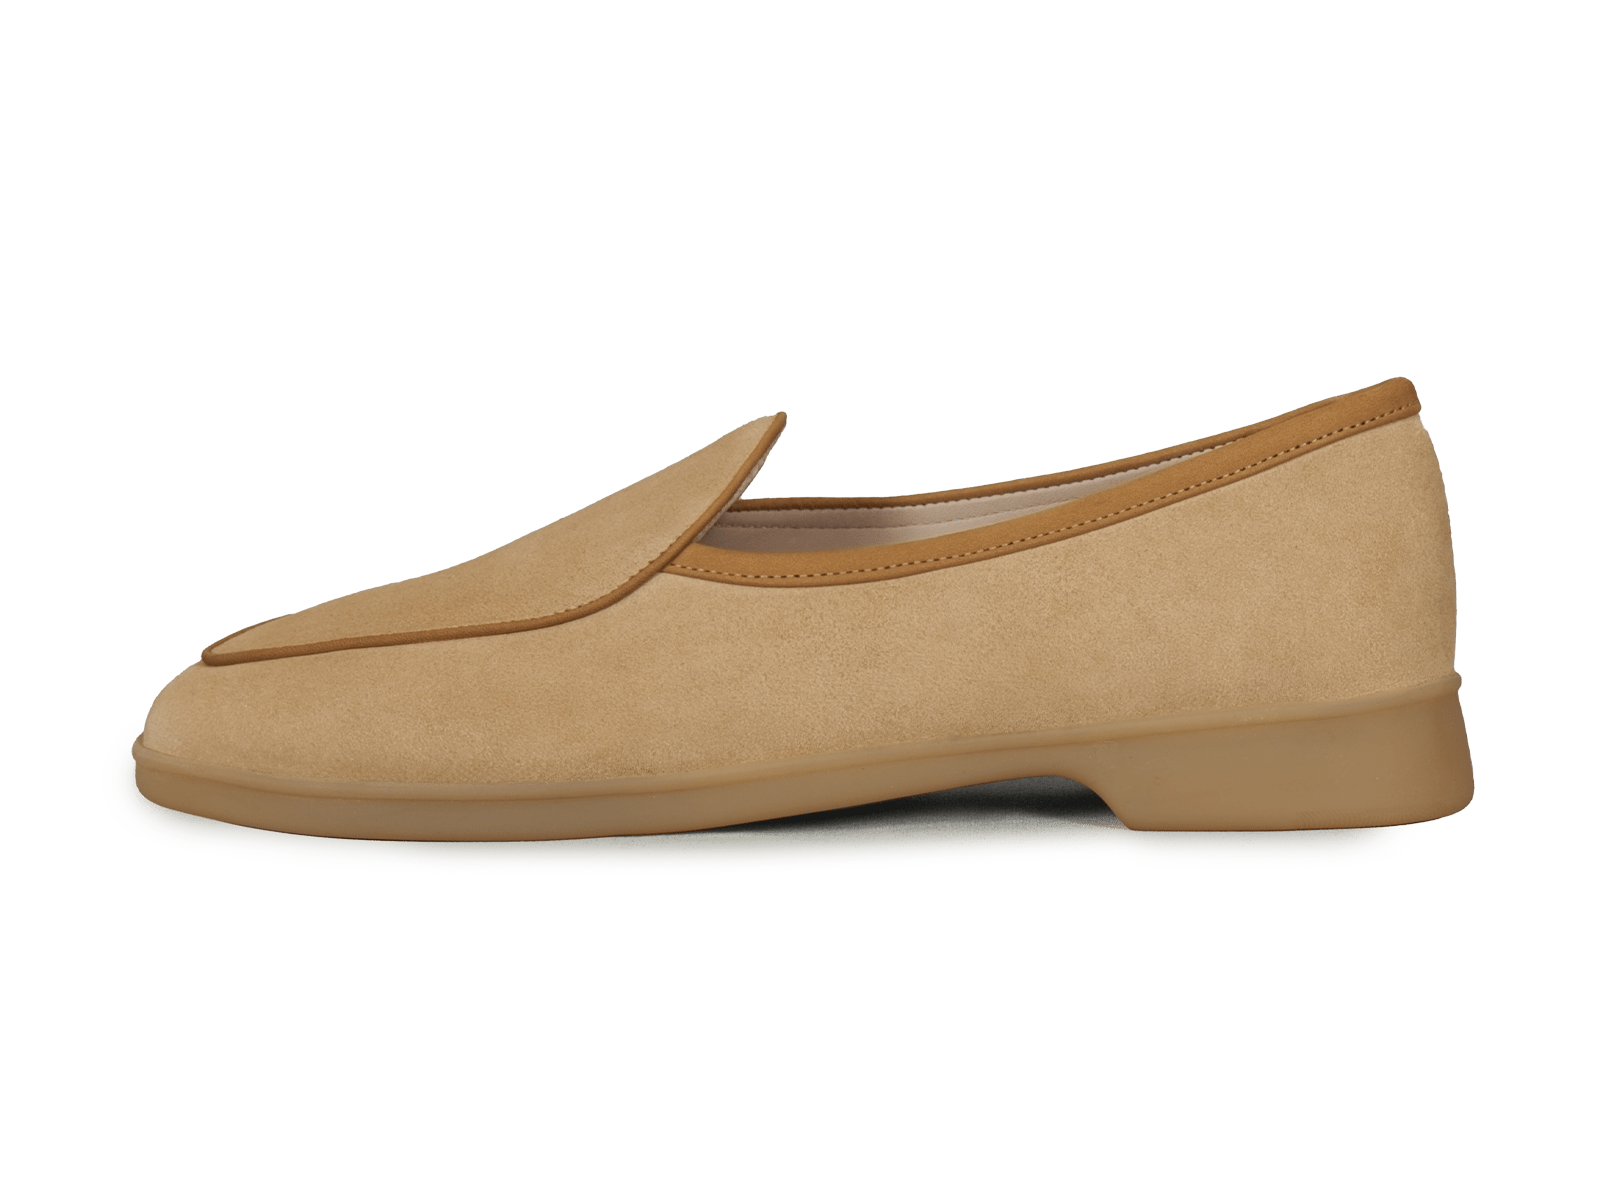 Stride Loafers in Tropez Beige Suede Natural Sole